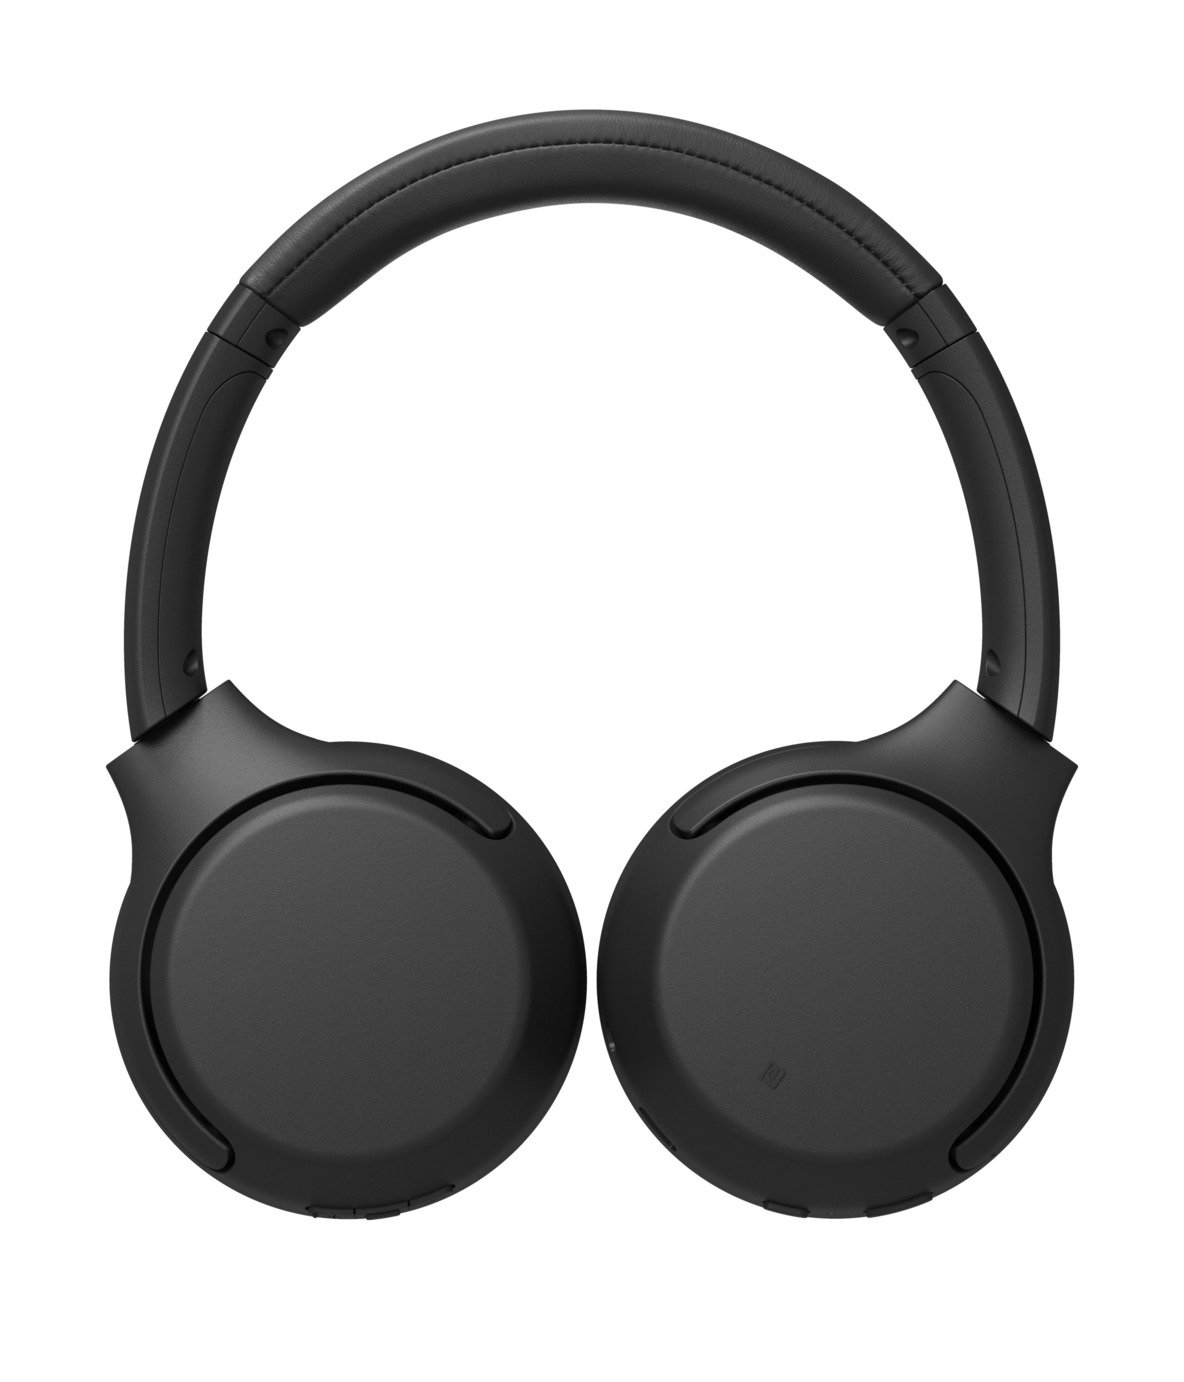 Sony WH-XB700 Over-Ear Wireless Headphones Review